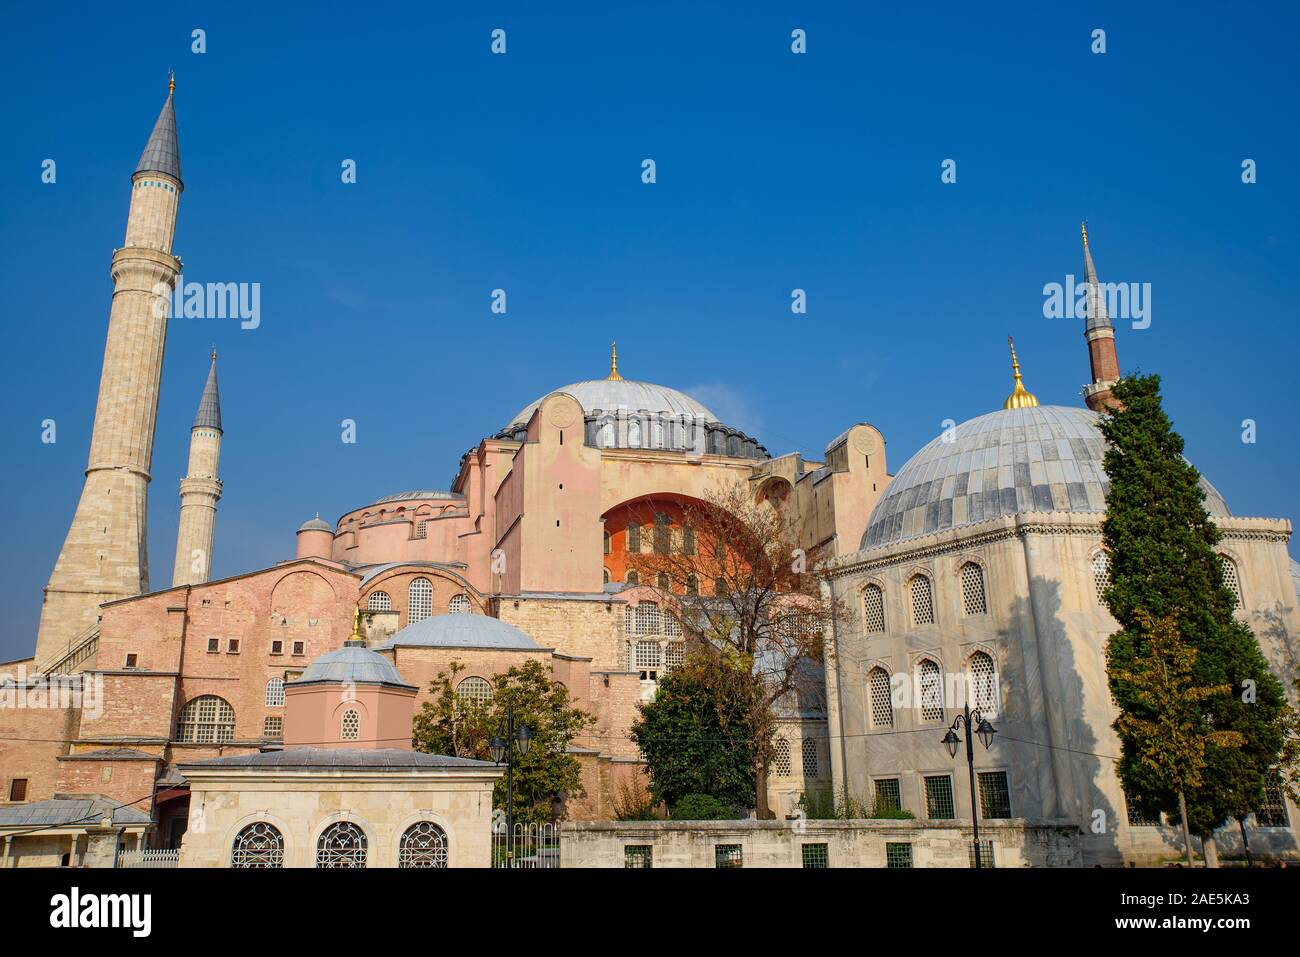 Hagia Sophia, former Orthodox cathedral and Ottoman imperial mosque, in Istanbul, Turkey Stock Photo